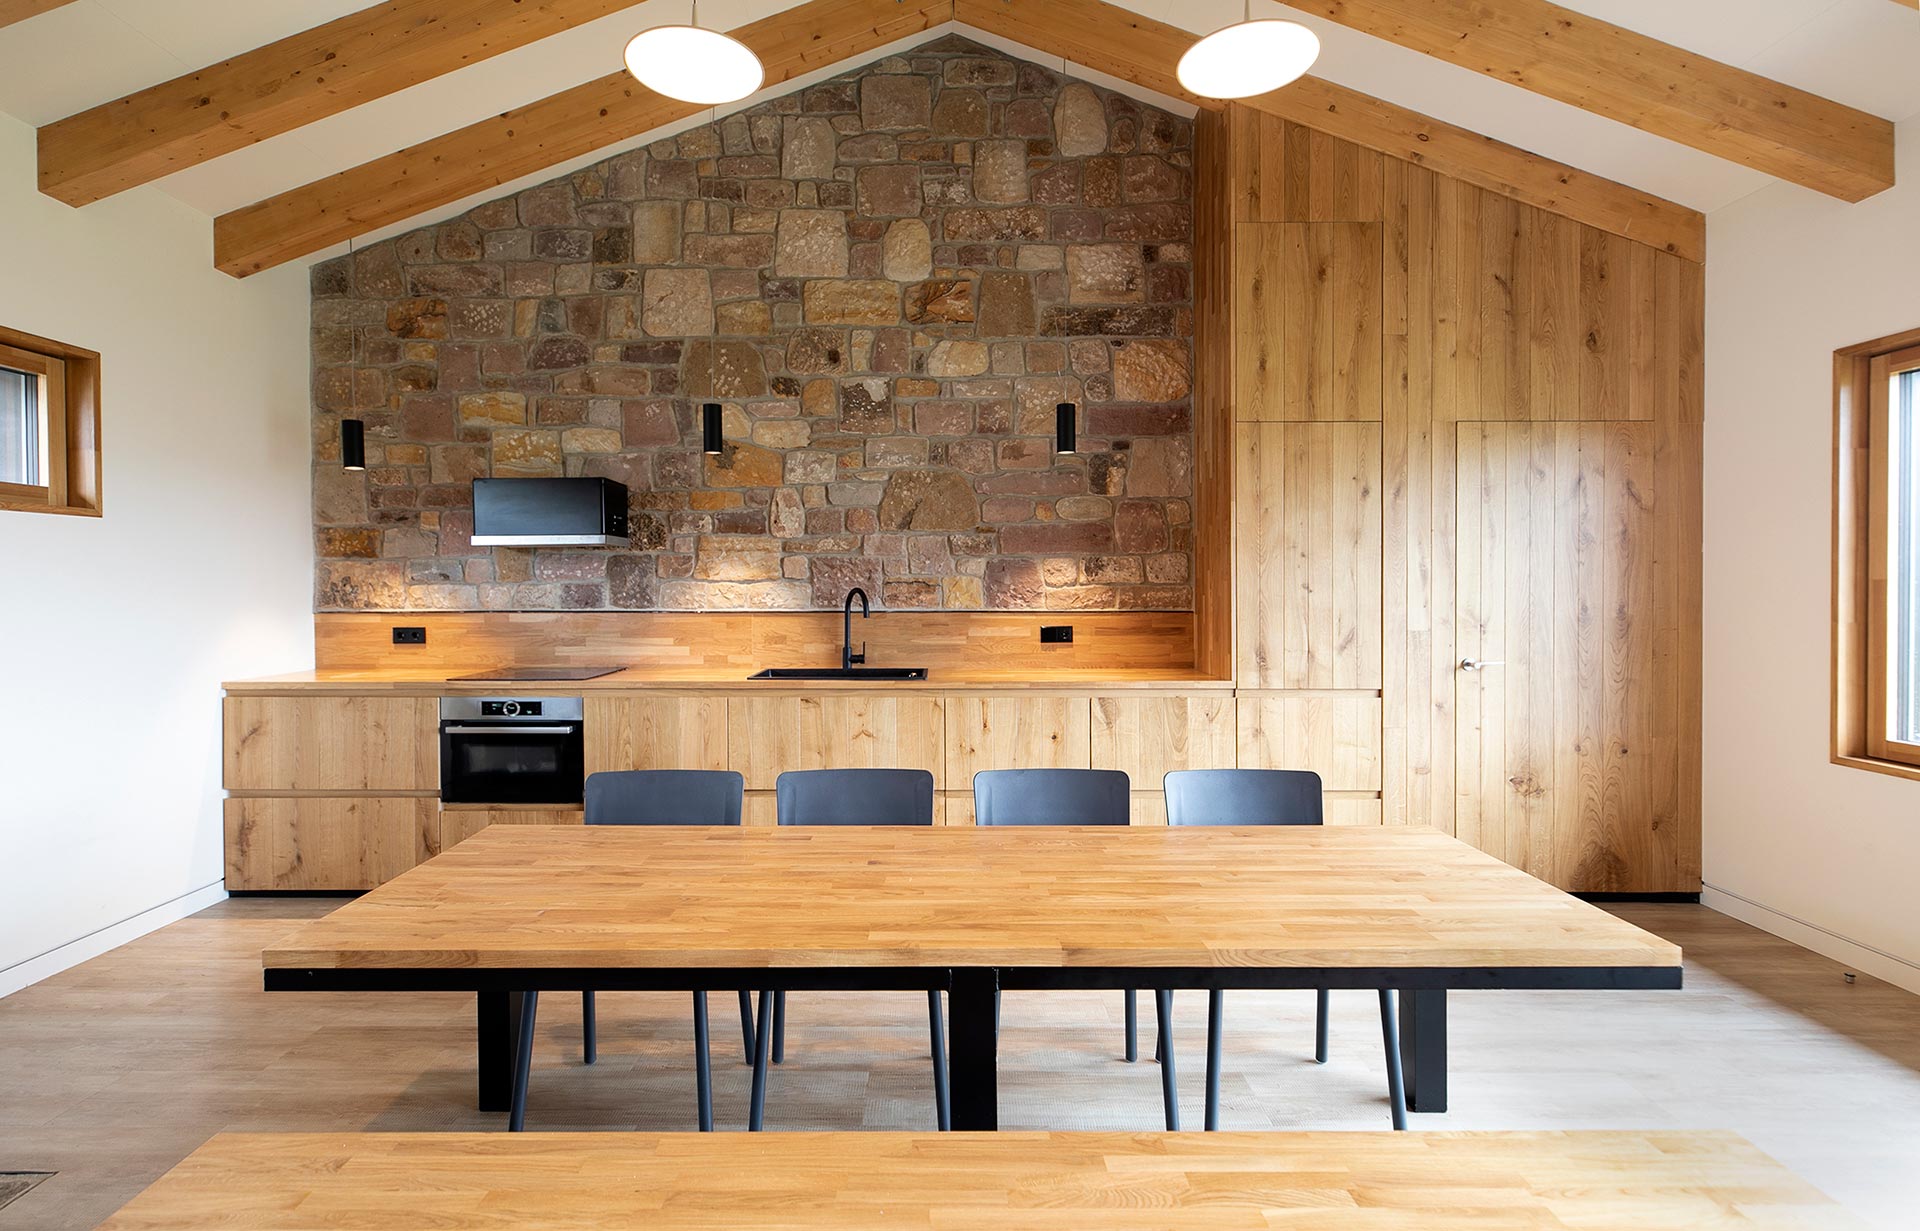 Kitchen of modern cottage in Proaño designed by Moah Architects in Cantabria